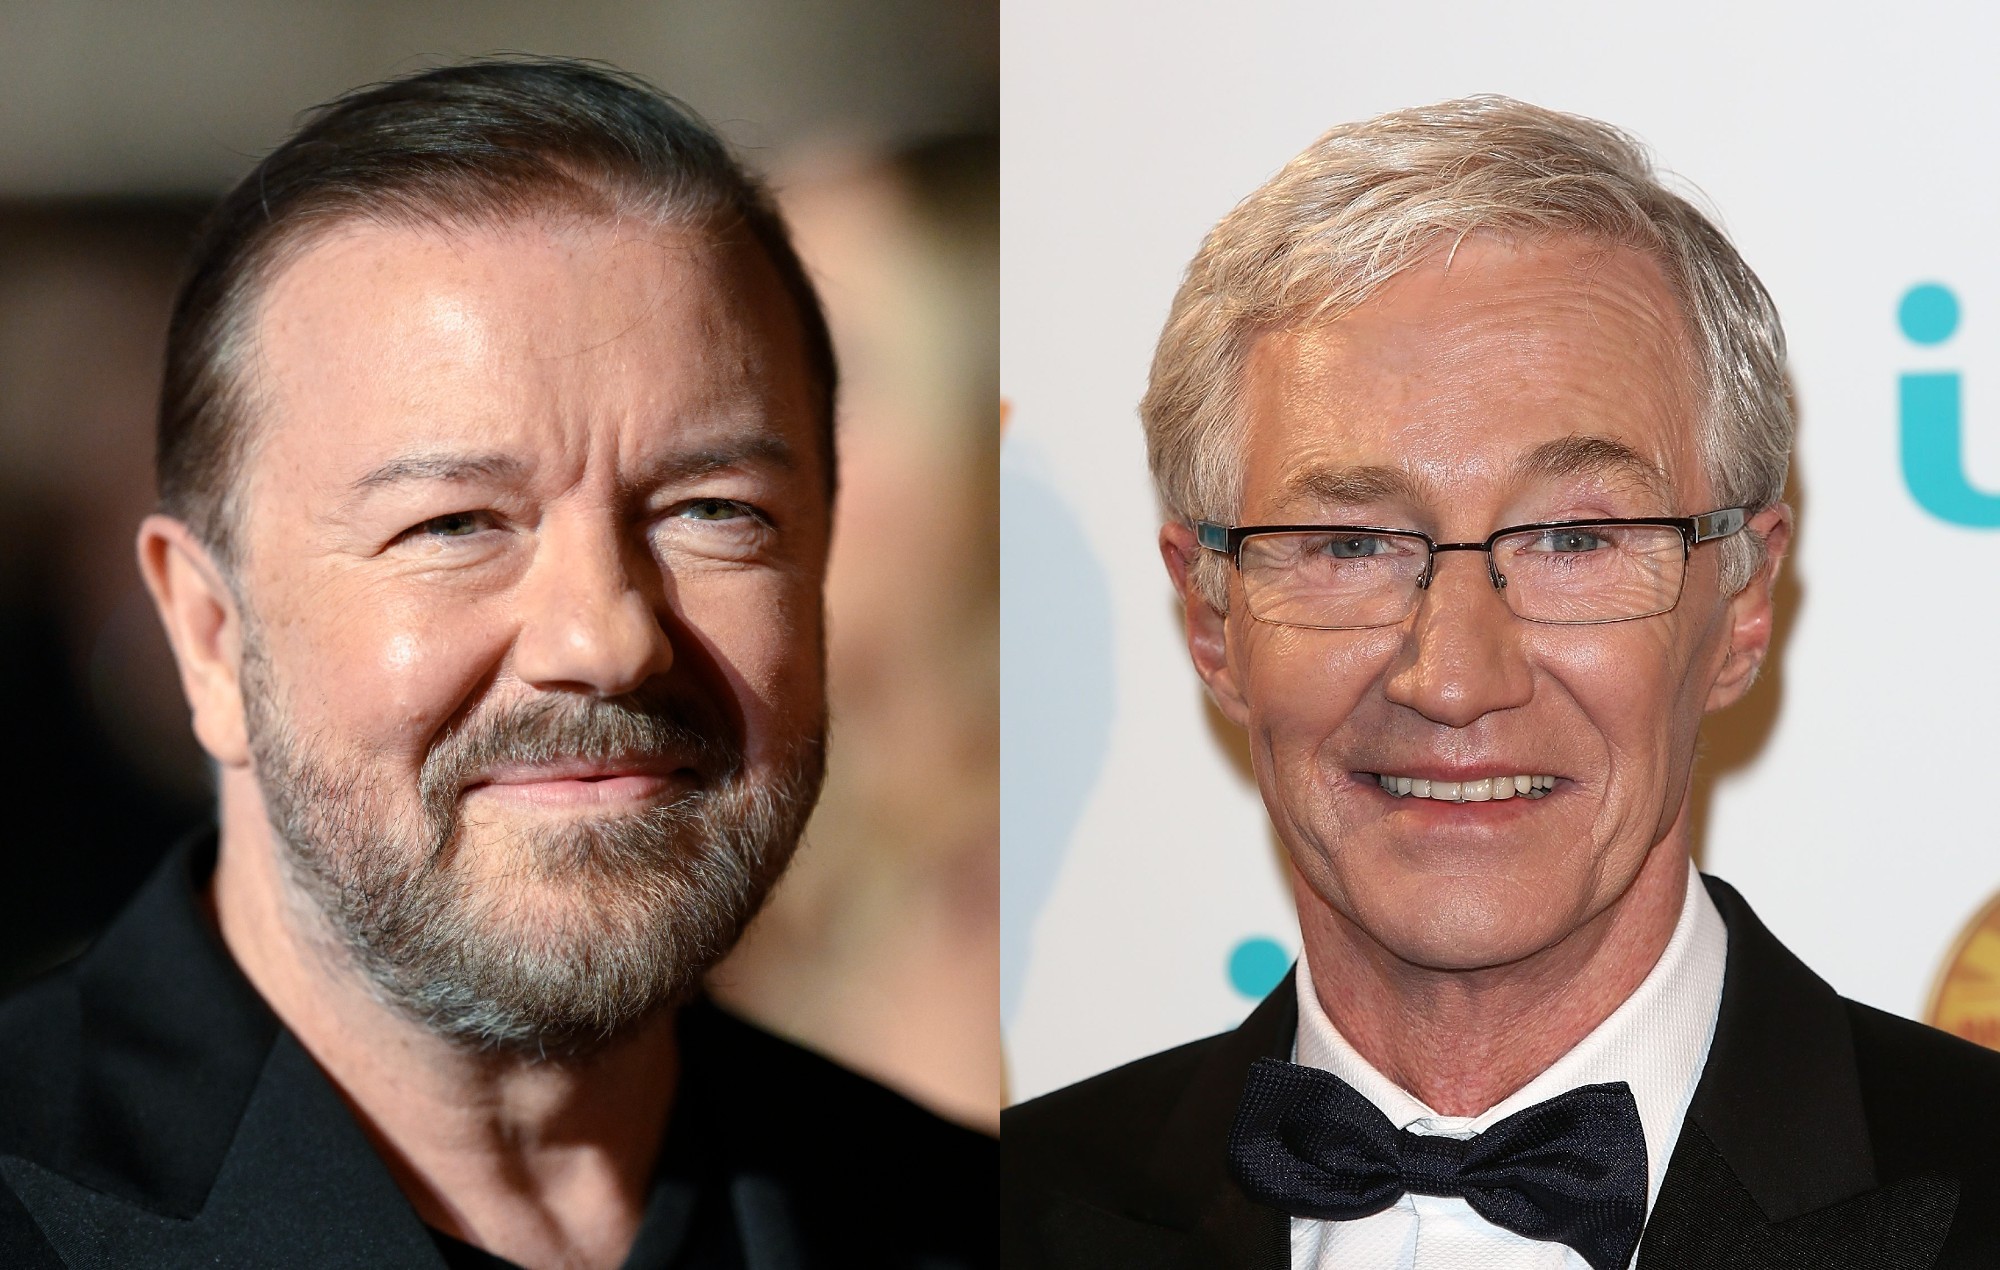 Ricky Gervais turned down offer to replace Paul O’Grady on TV reboot